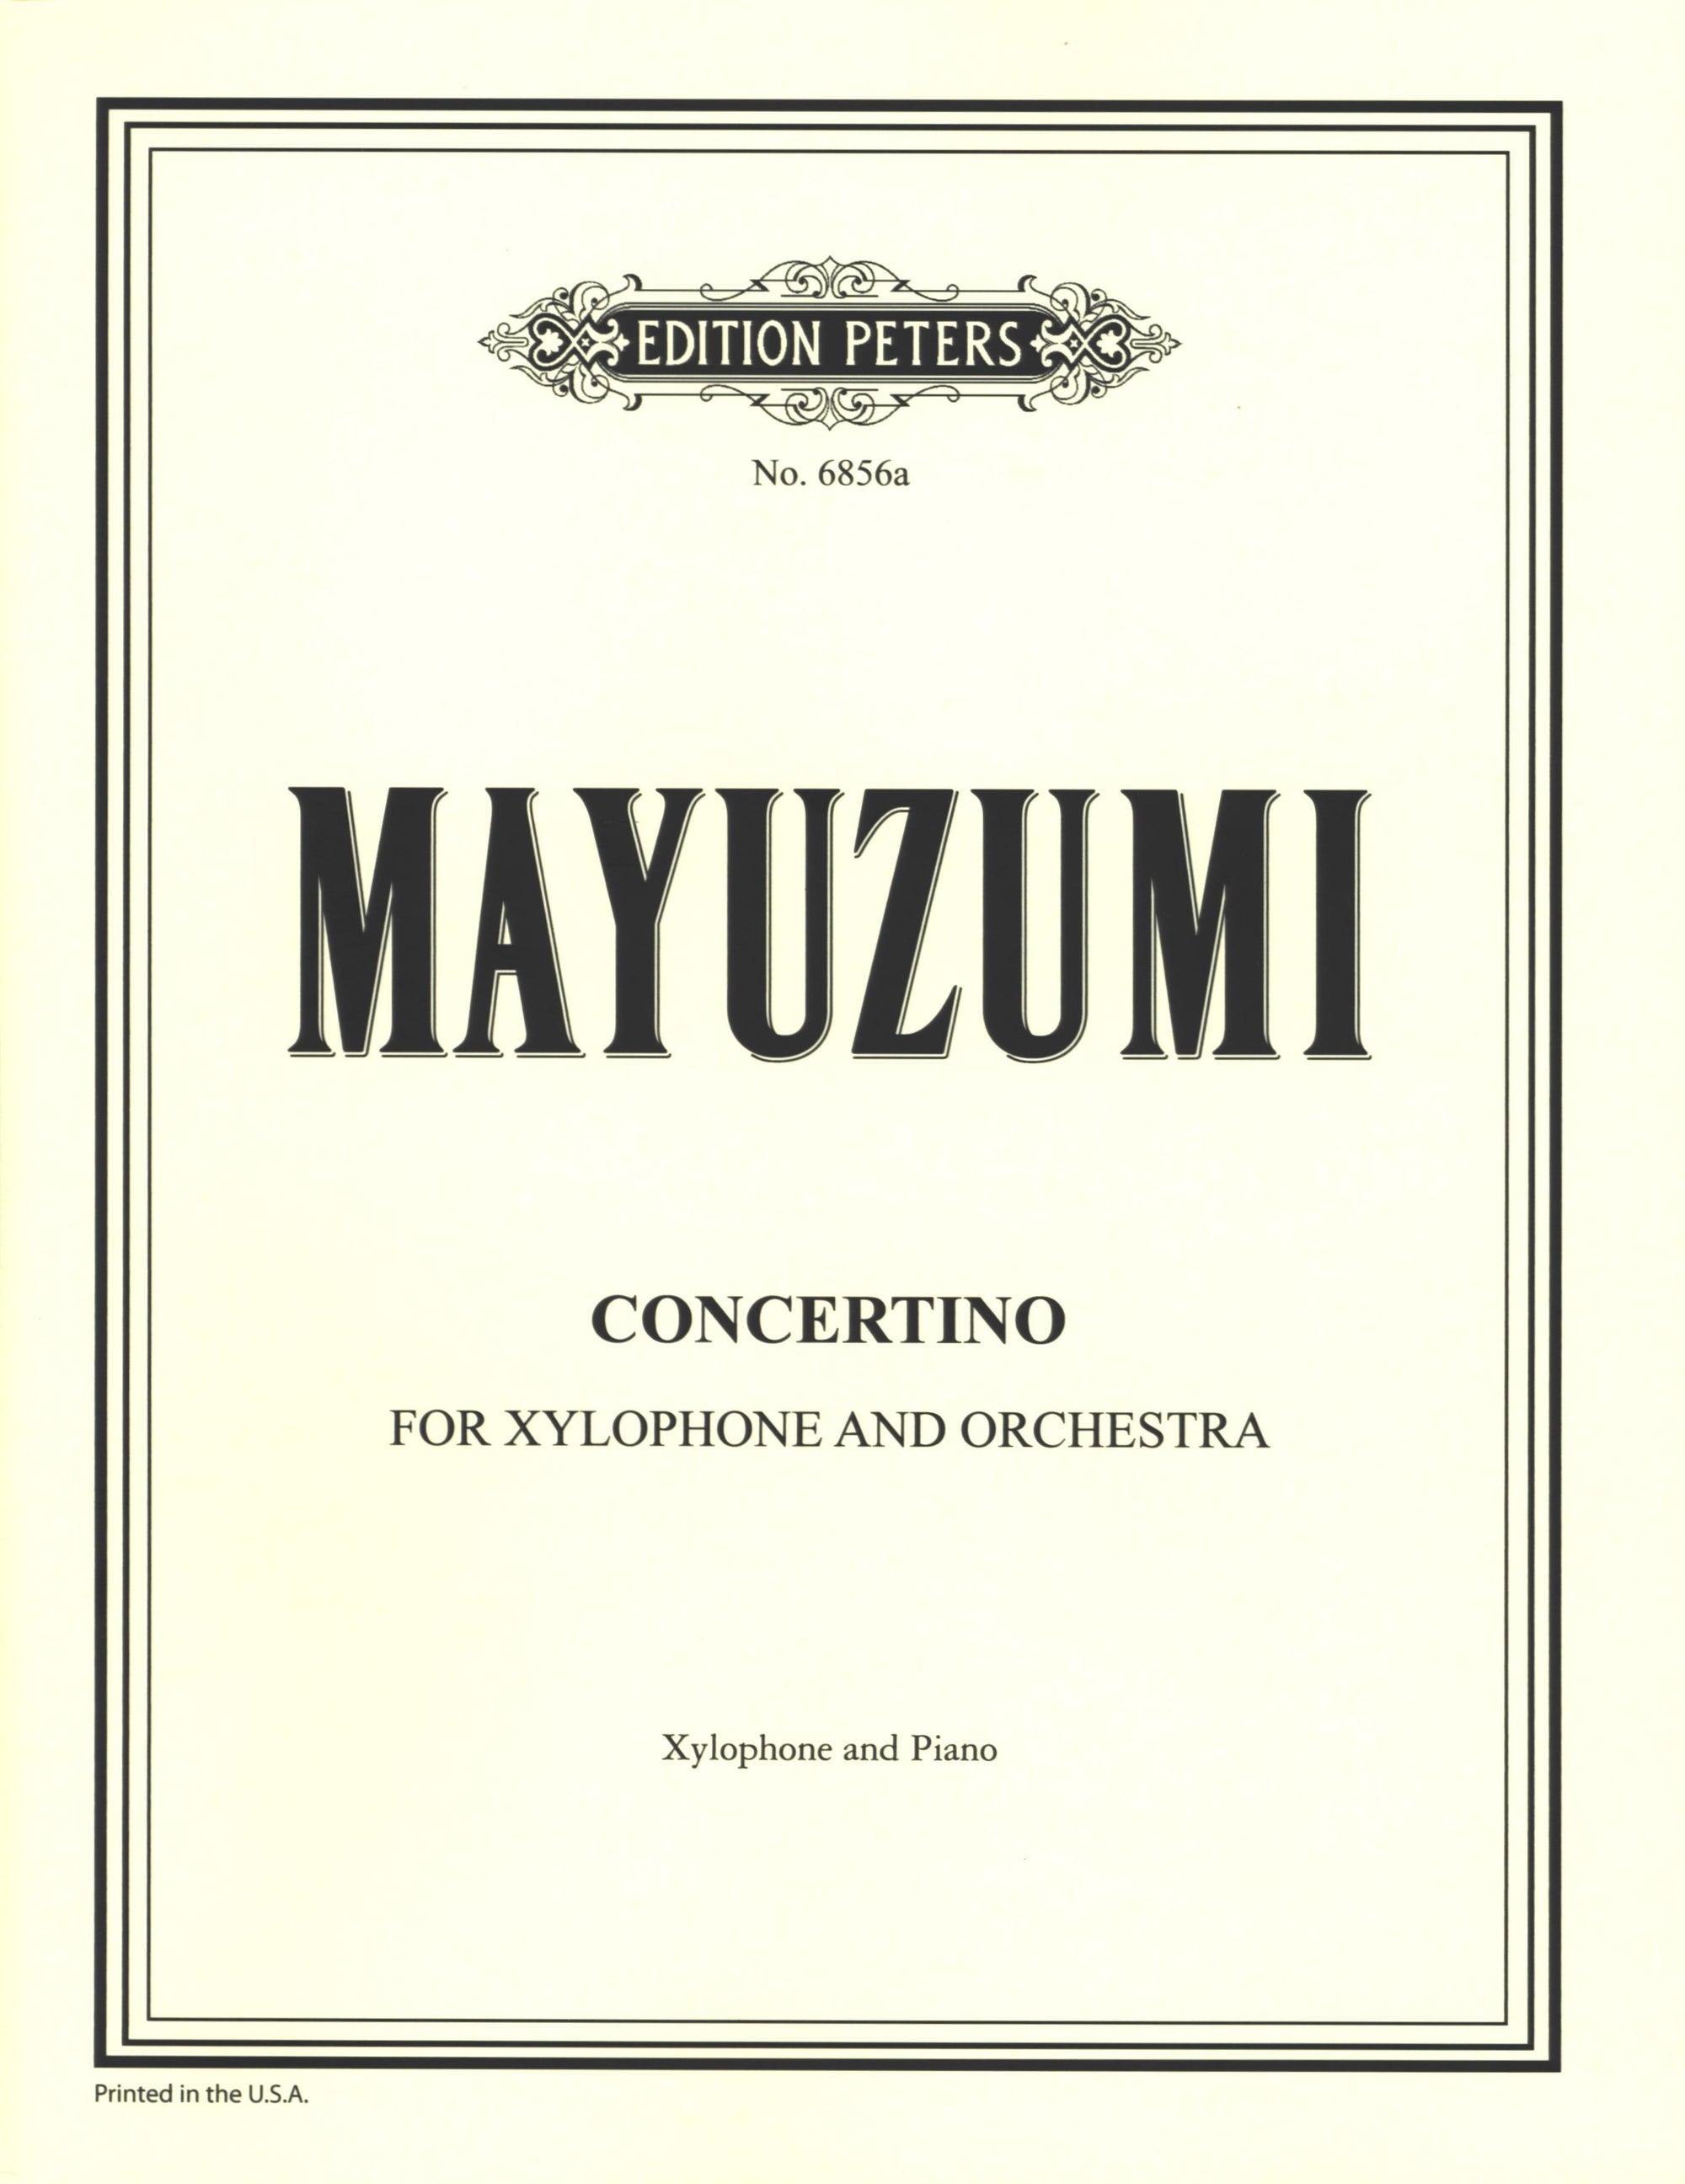 Mayuzumi: Concertino for Xylophone and Orchestra